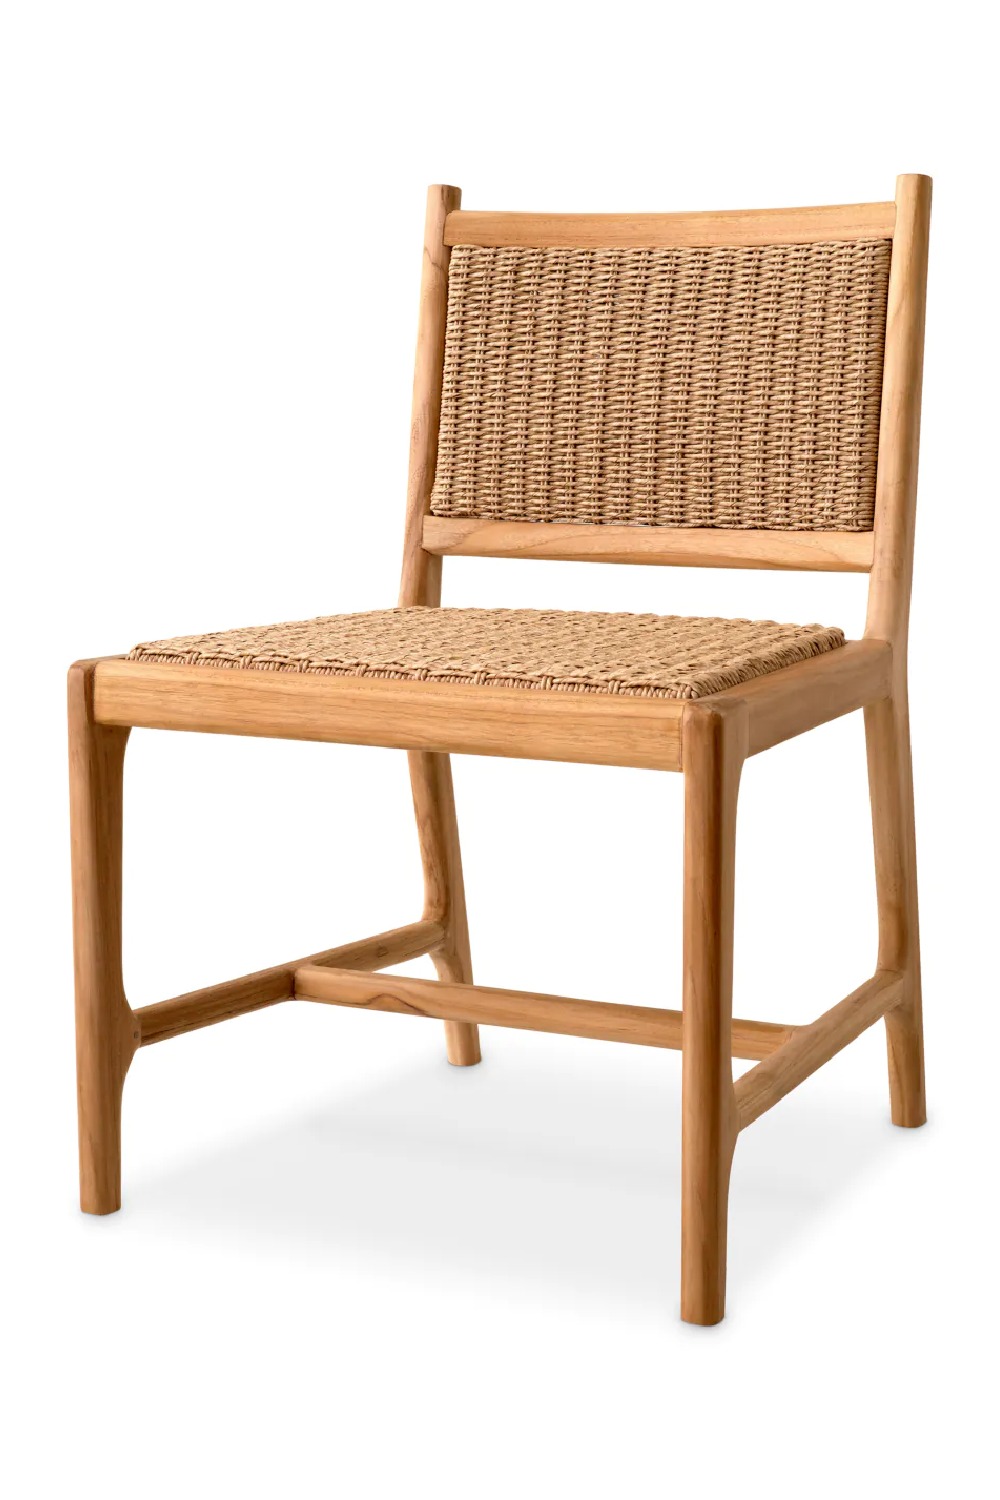 Natural Weave Outdoor Dining Chair | Eichholtz Pivetti | Oroa.com